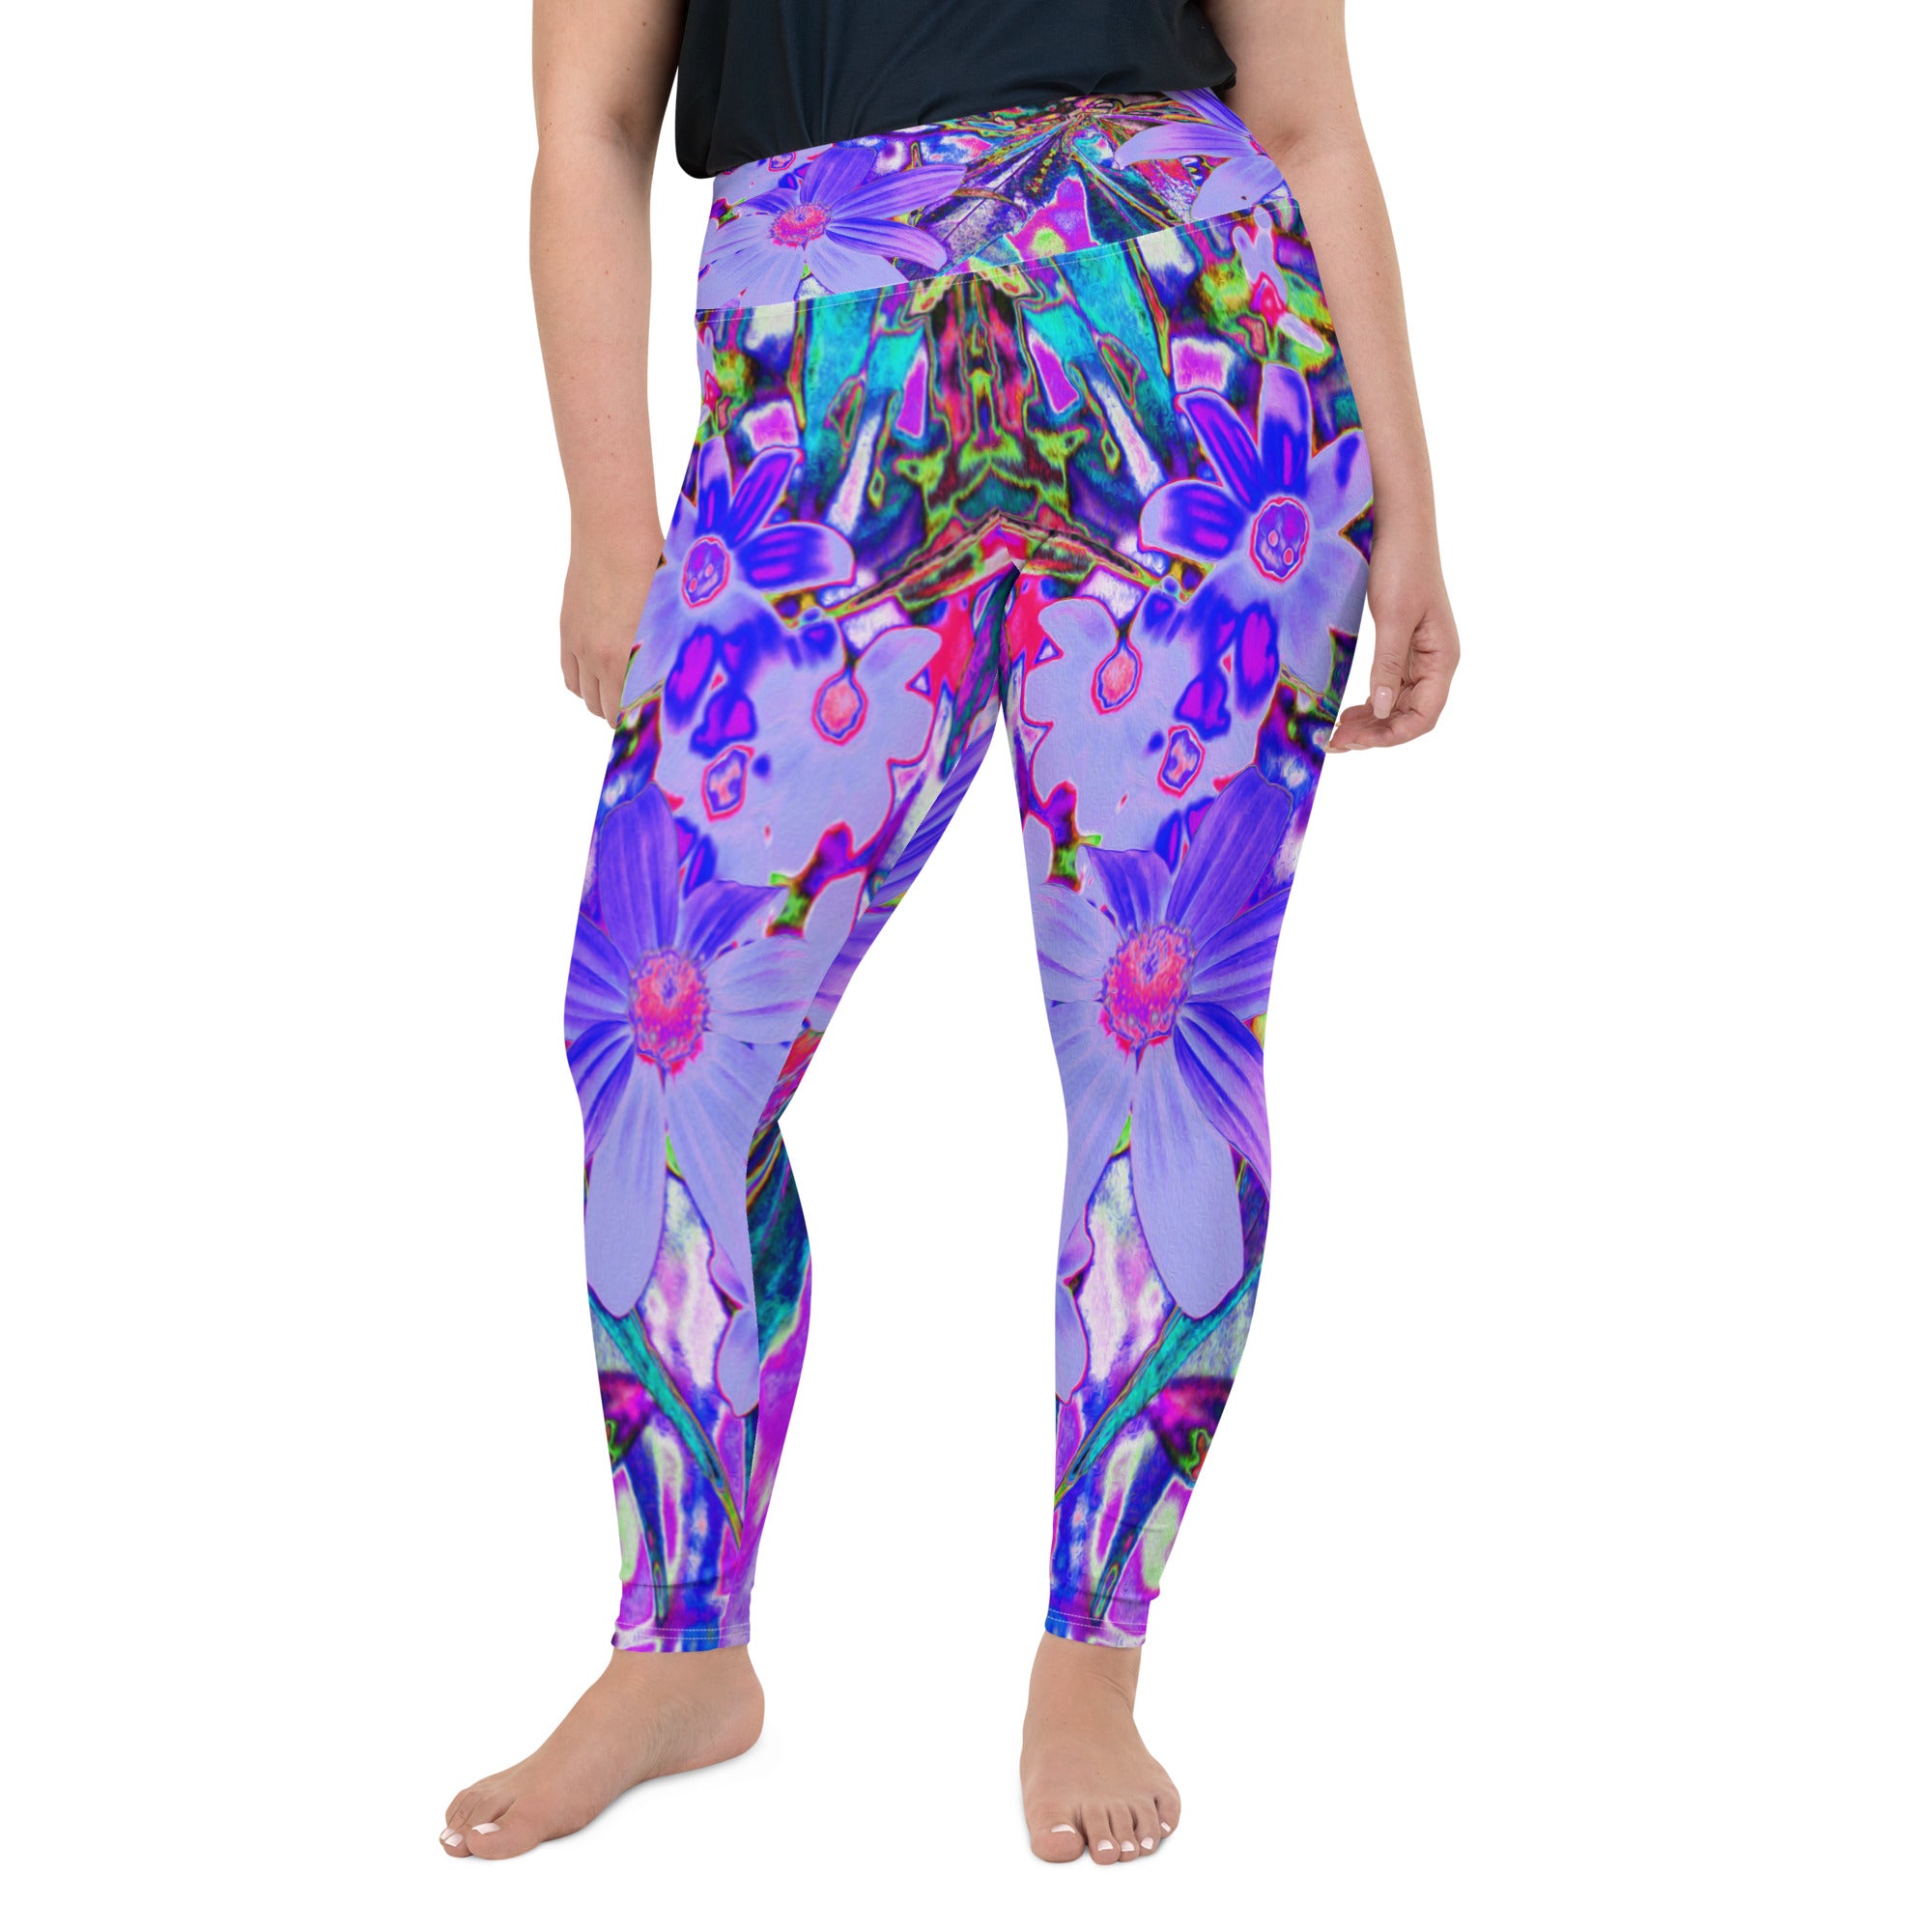 Plus Size Leggings, Trippy Purple and Magenta Colorful Wildflowers